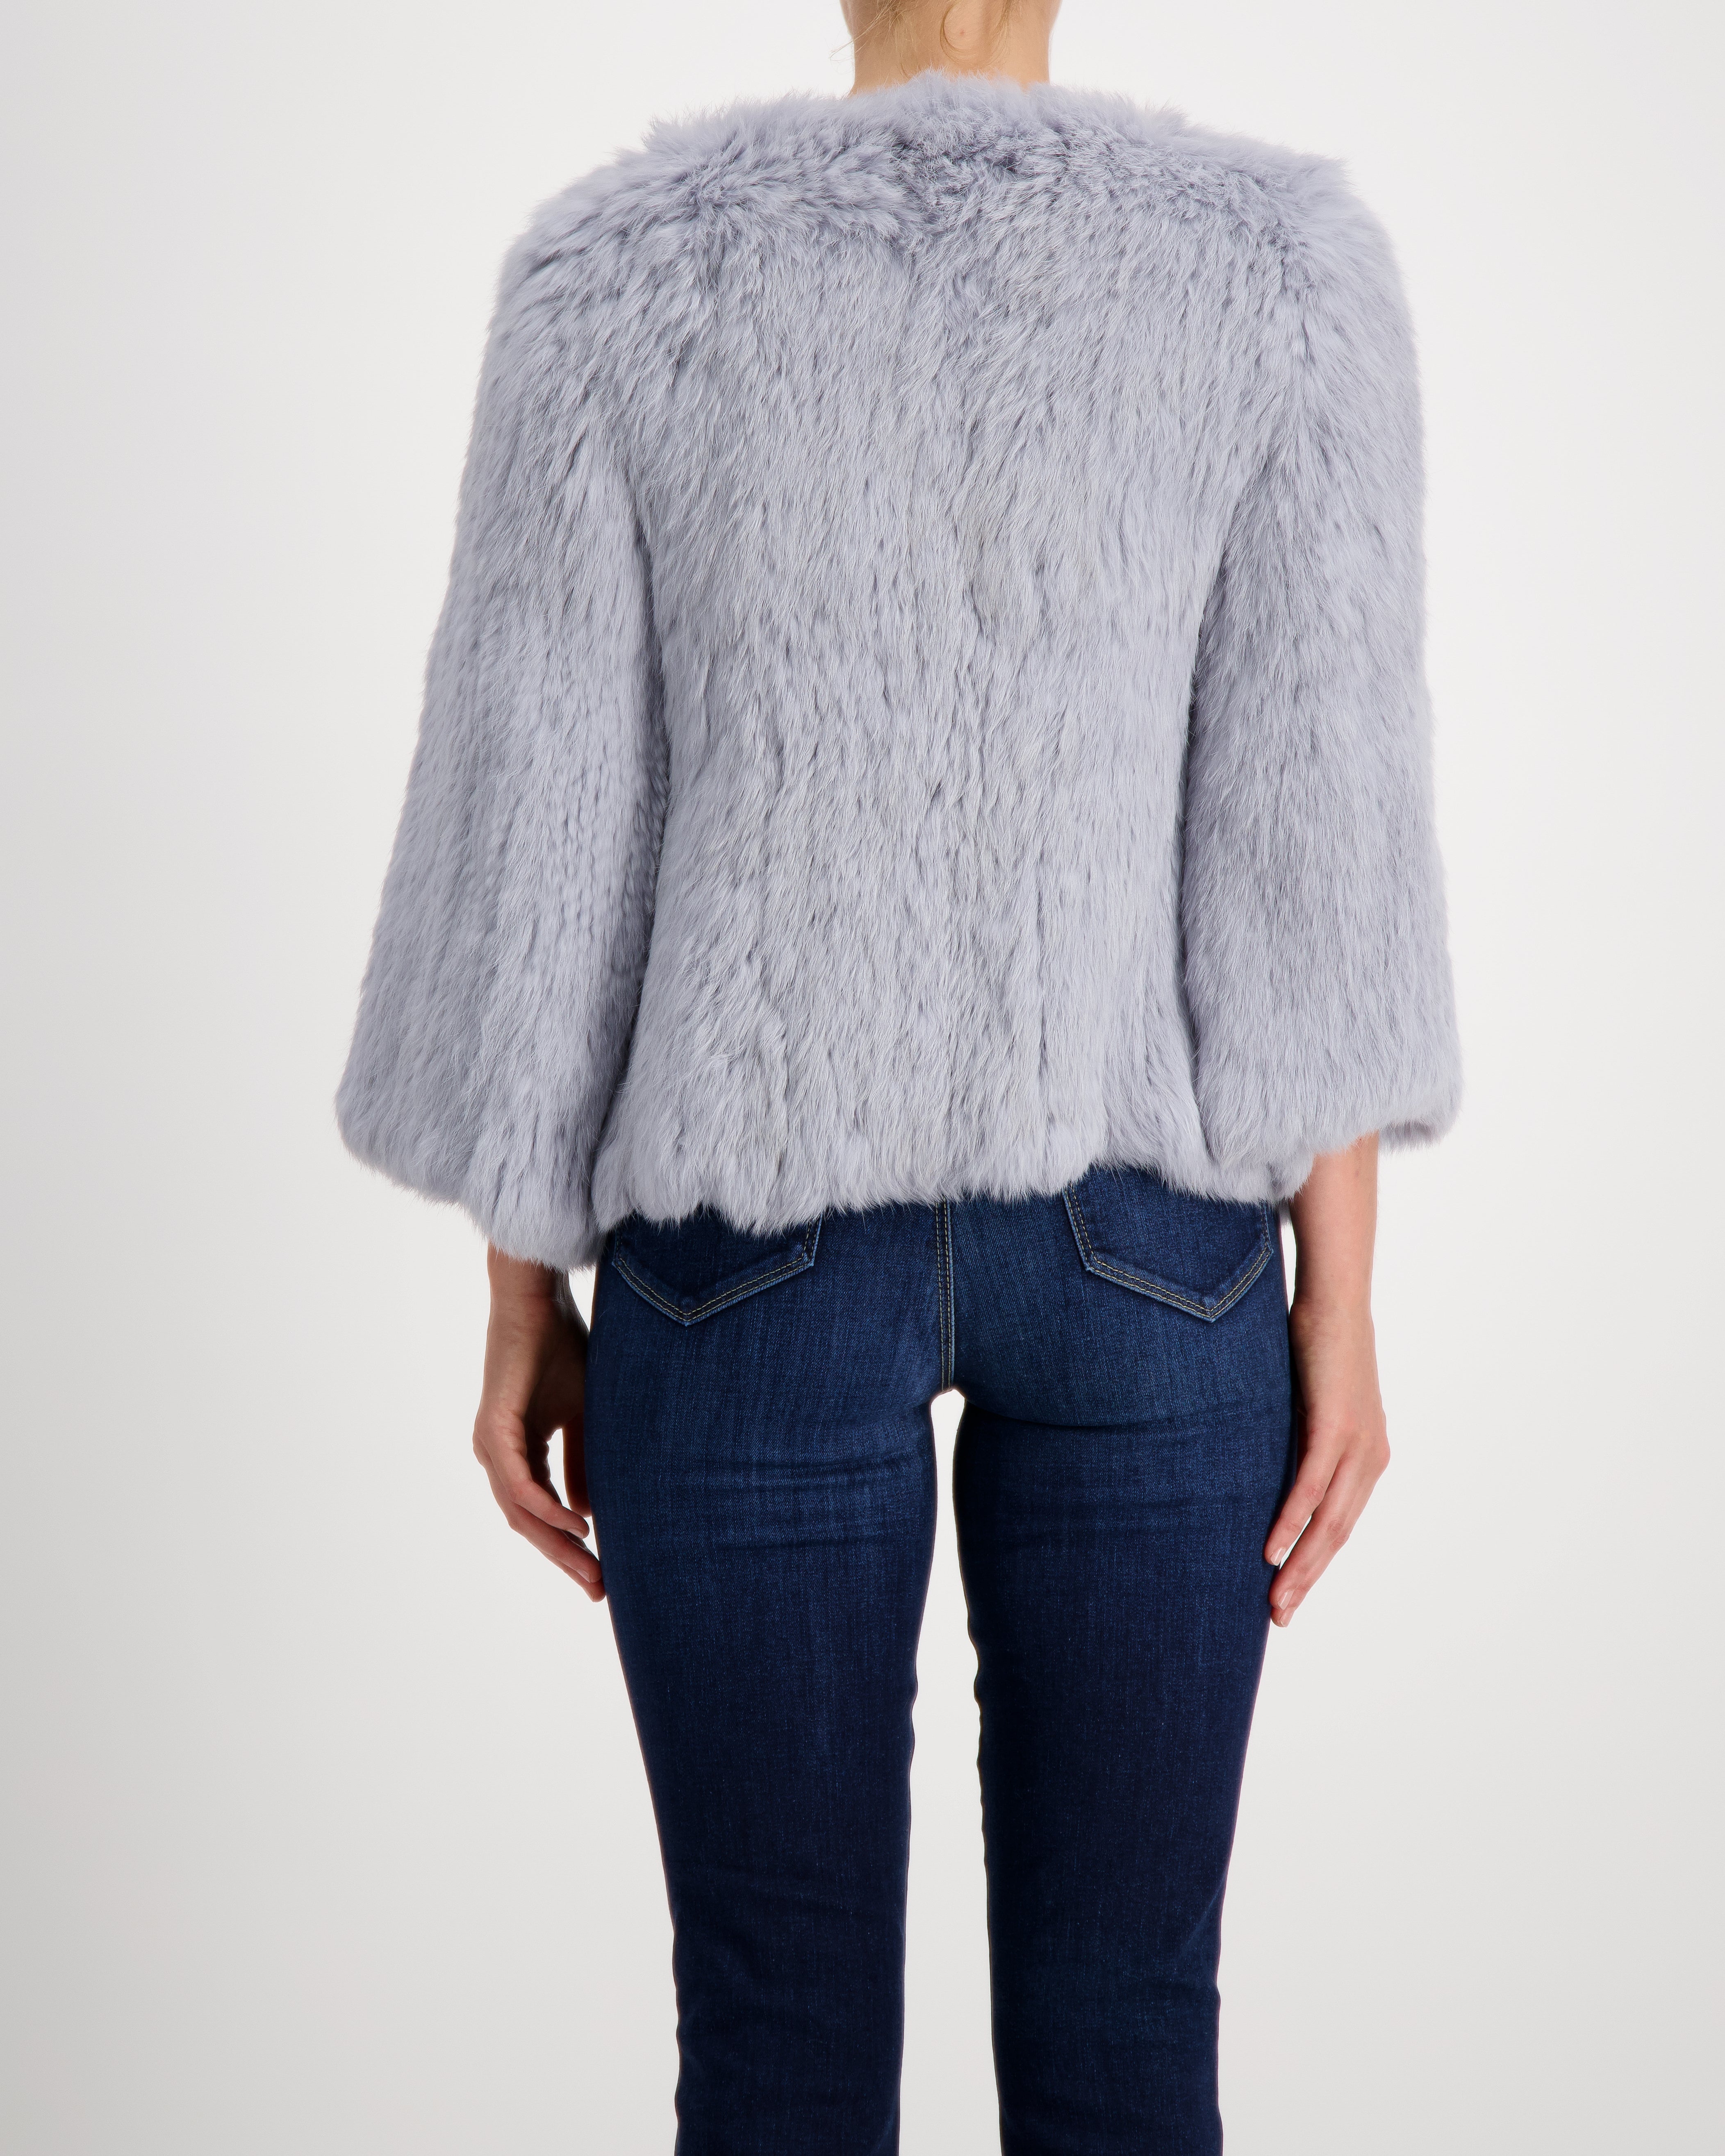 Knitted Hare Jacket in Nuage